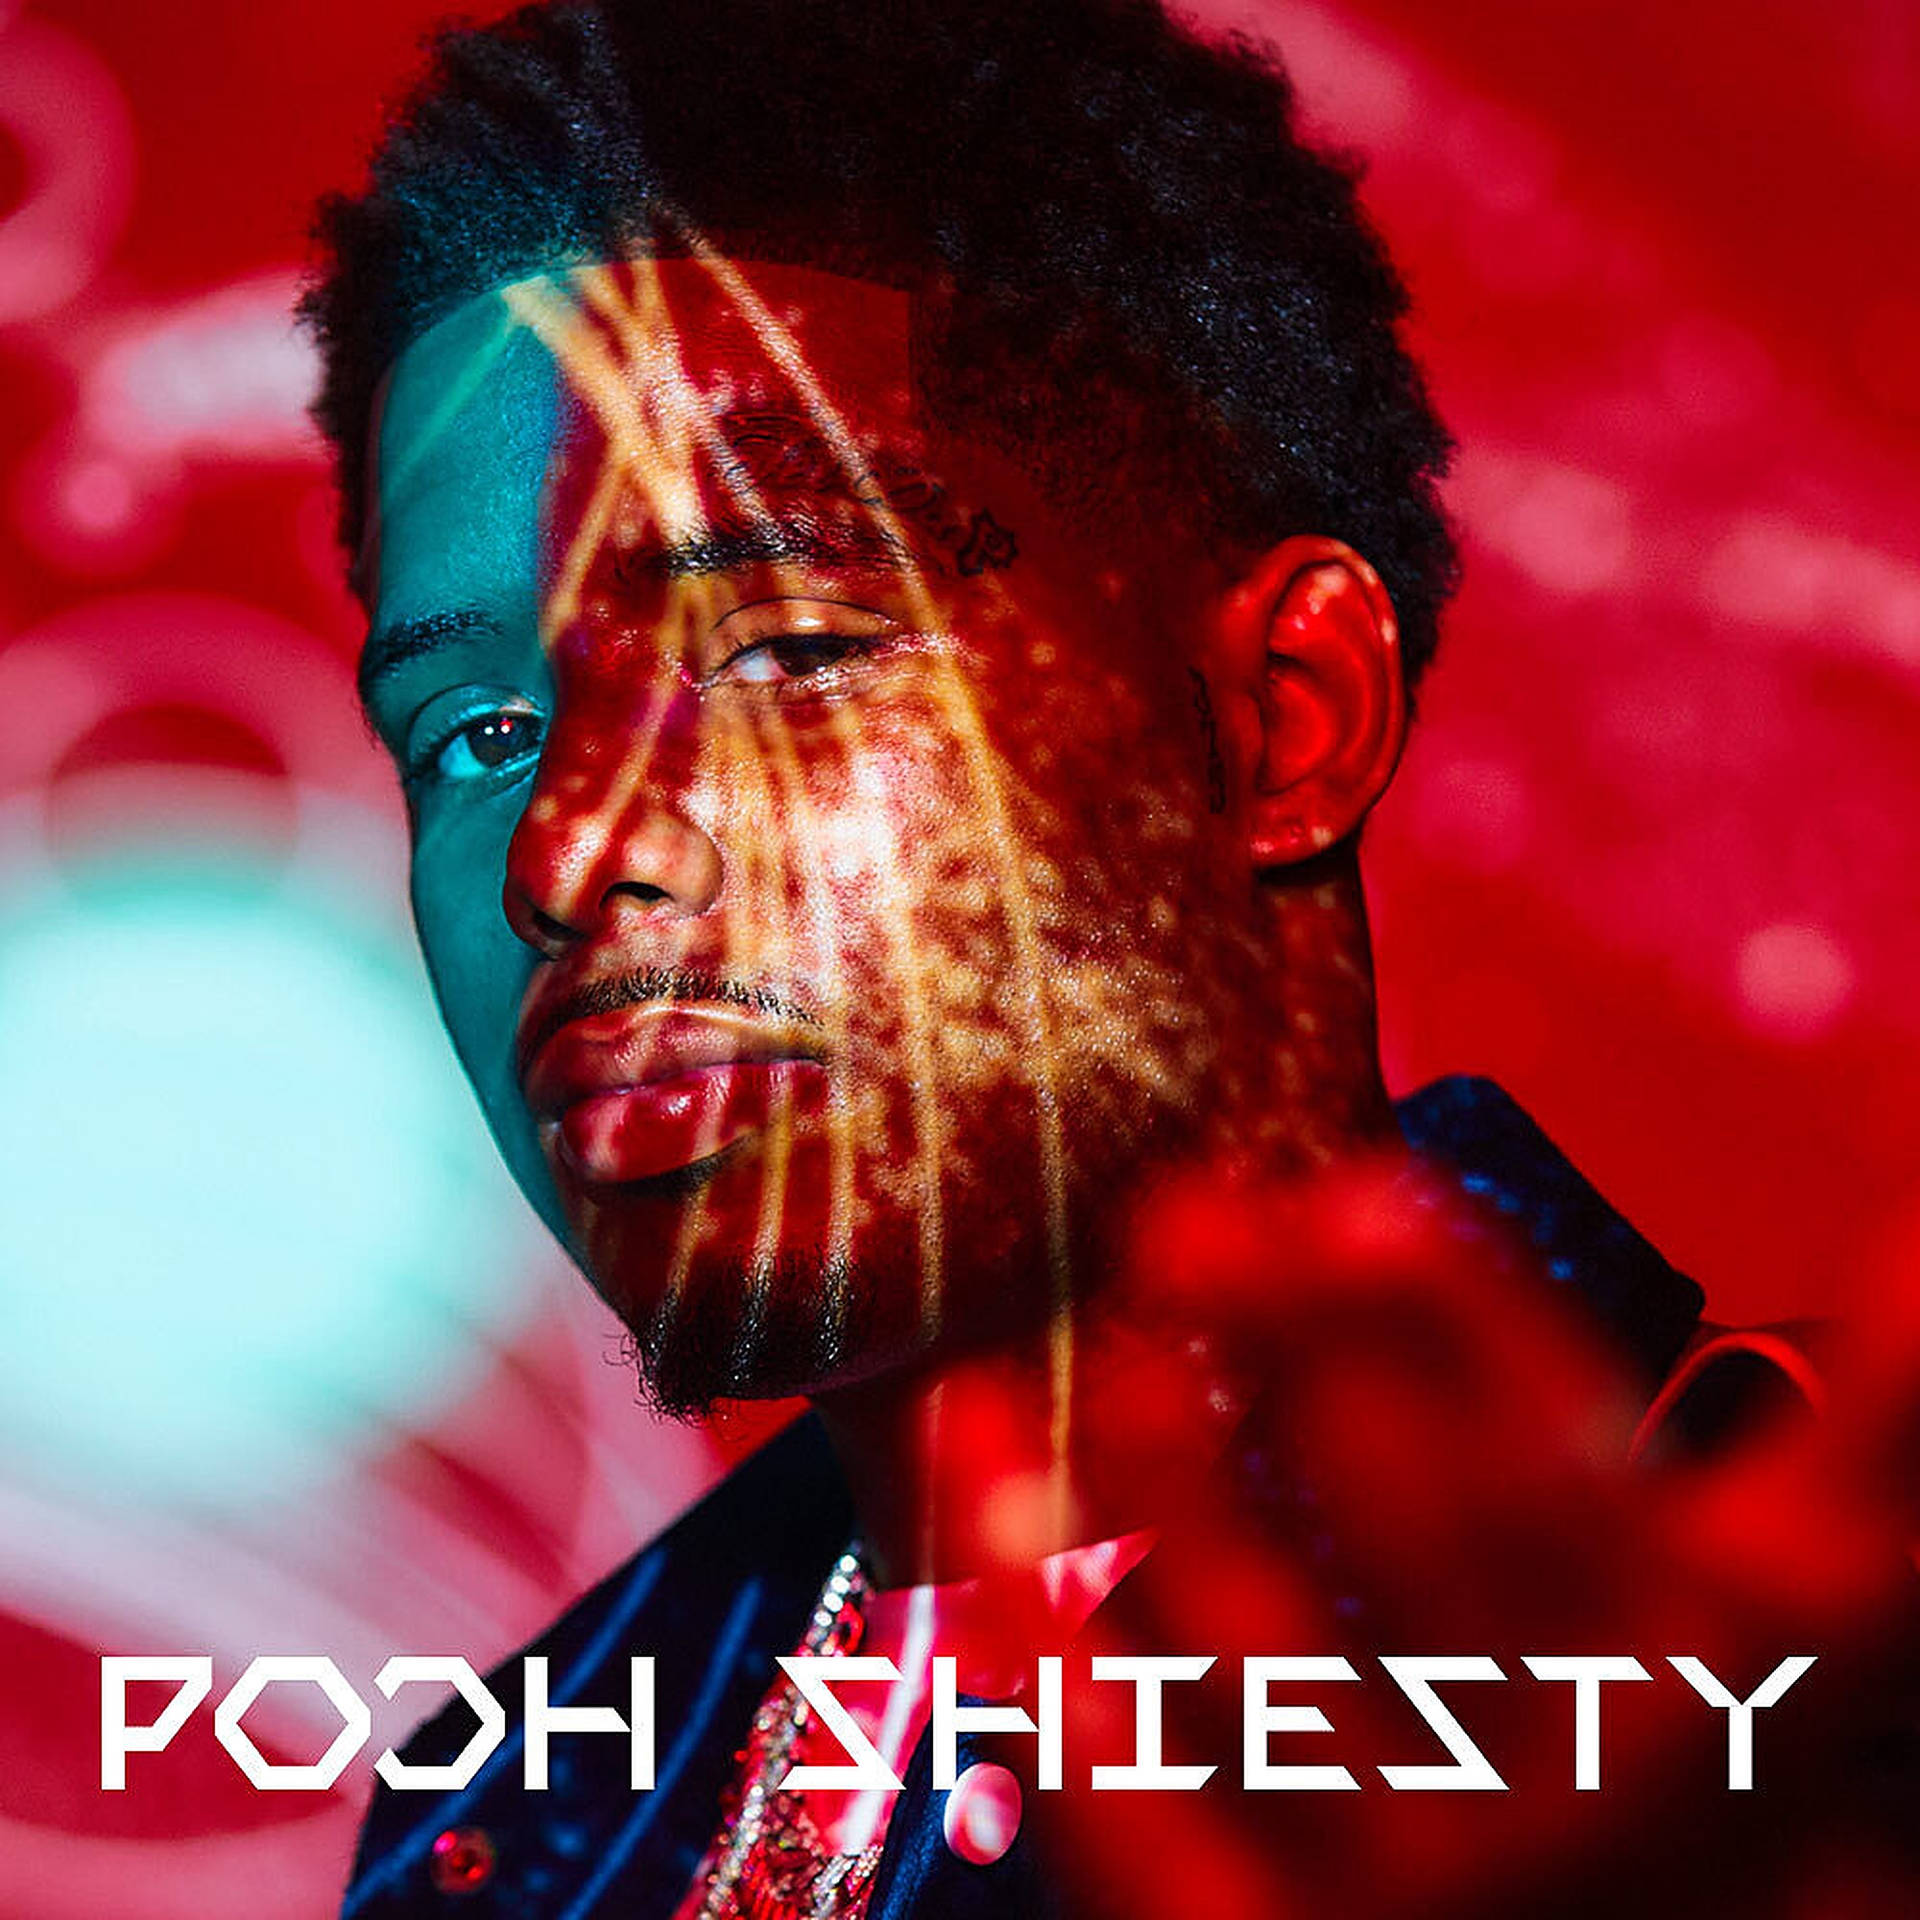 Poohshiesty Roter Poster Wallpaper